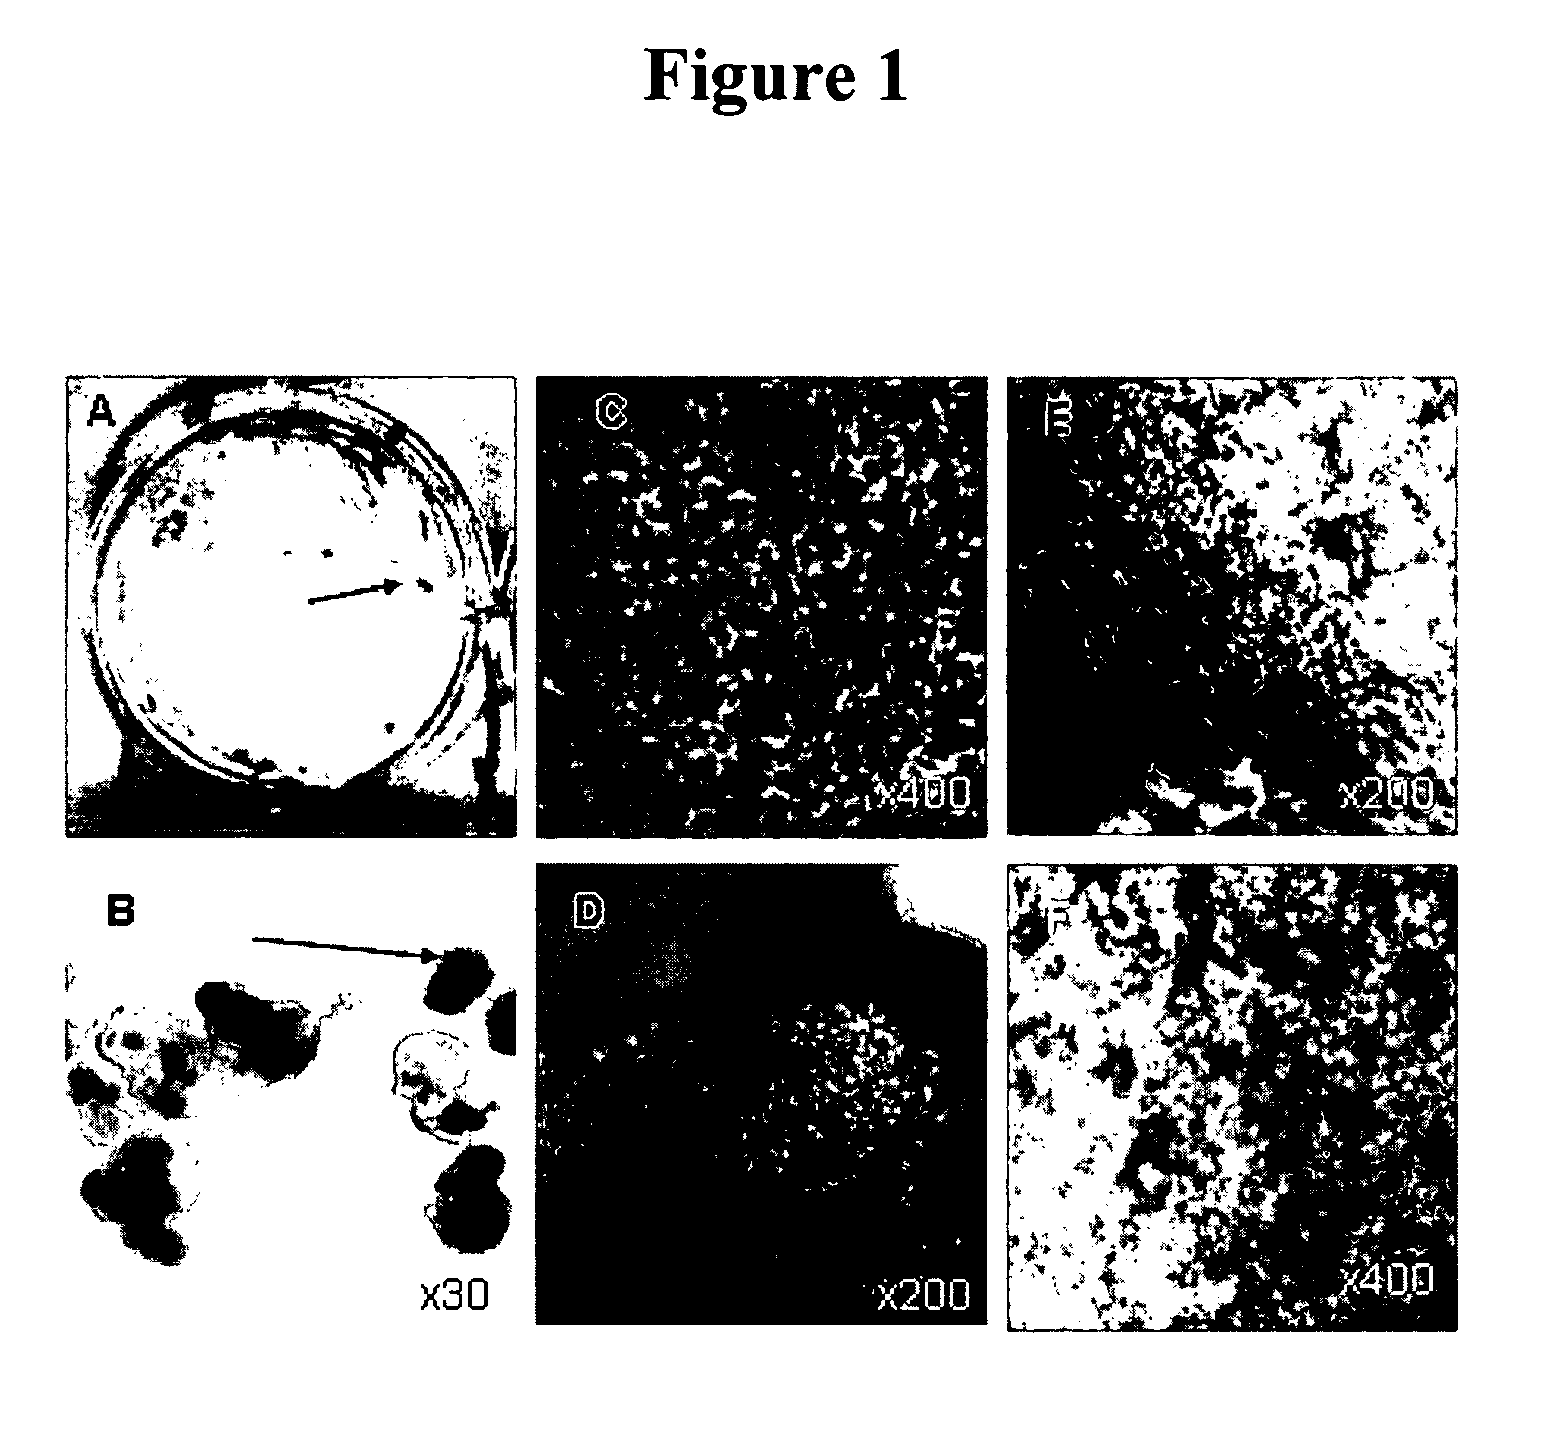 Methods for producing enriched populations of human retinal pigment epithelium cells for treatment of retinal degeneration